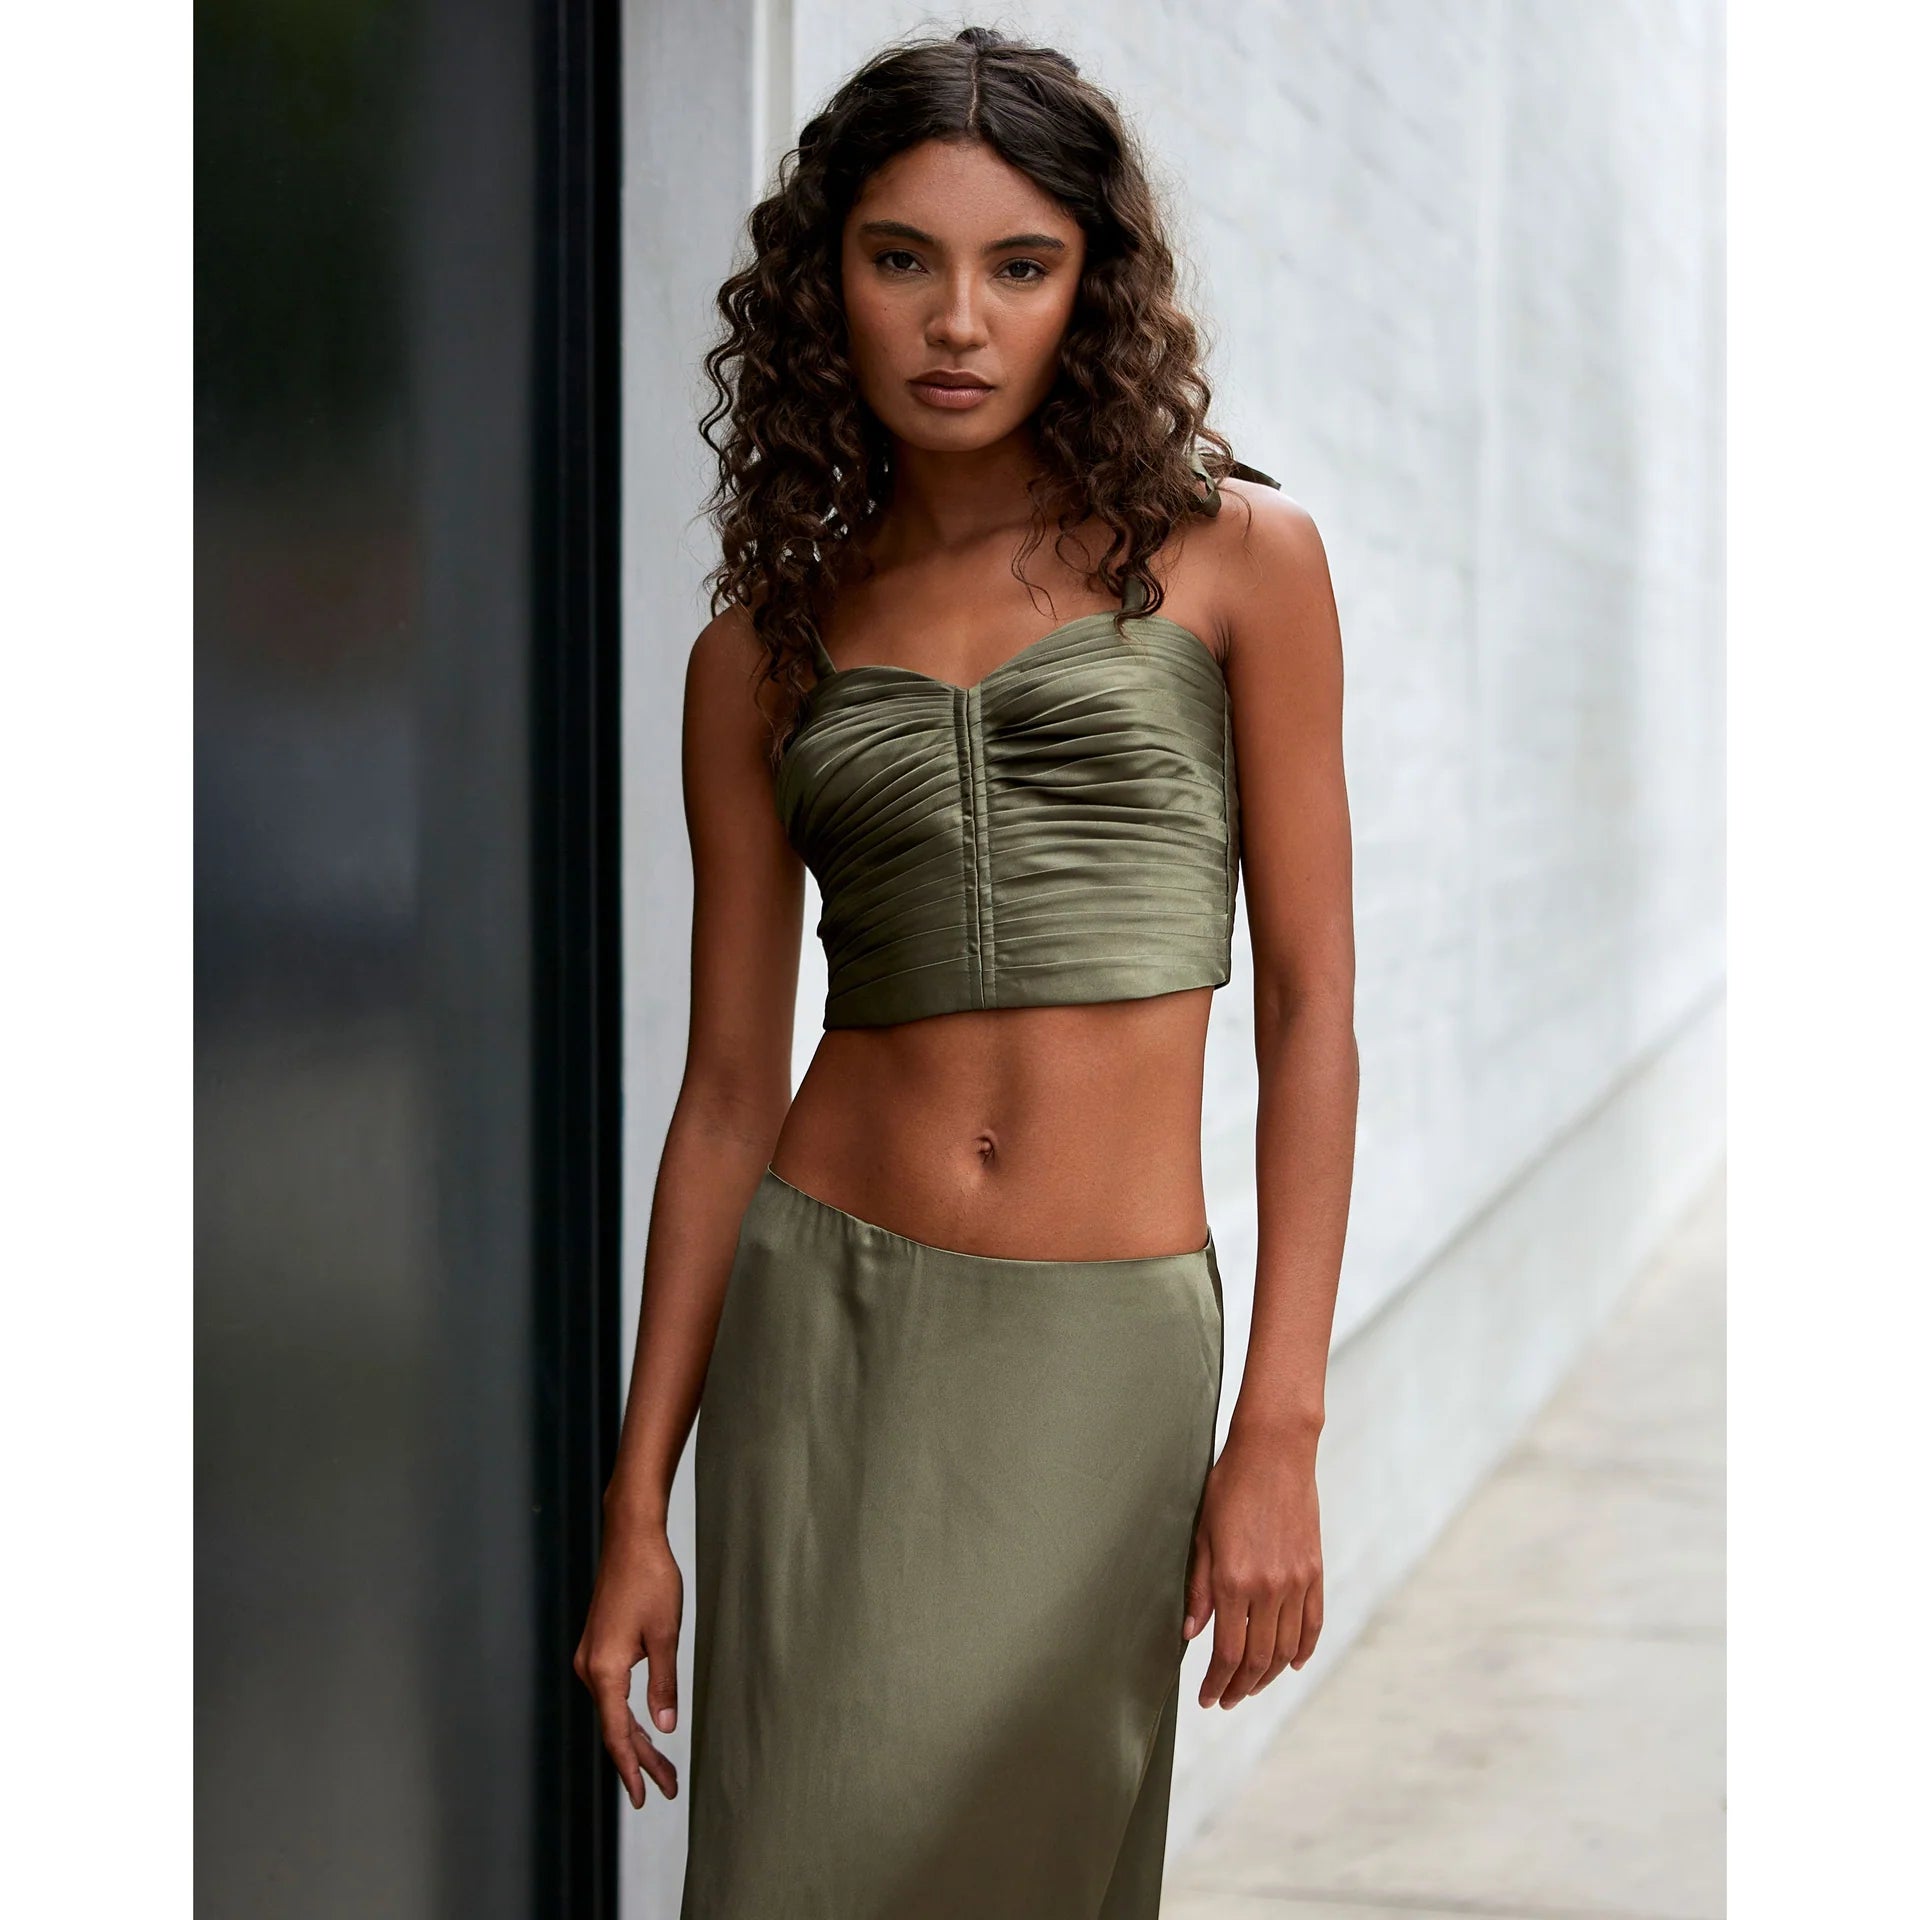 a model on how to use crop tops like a fashionista